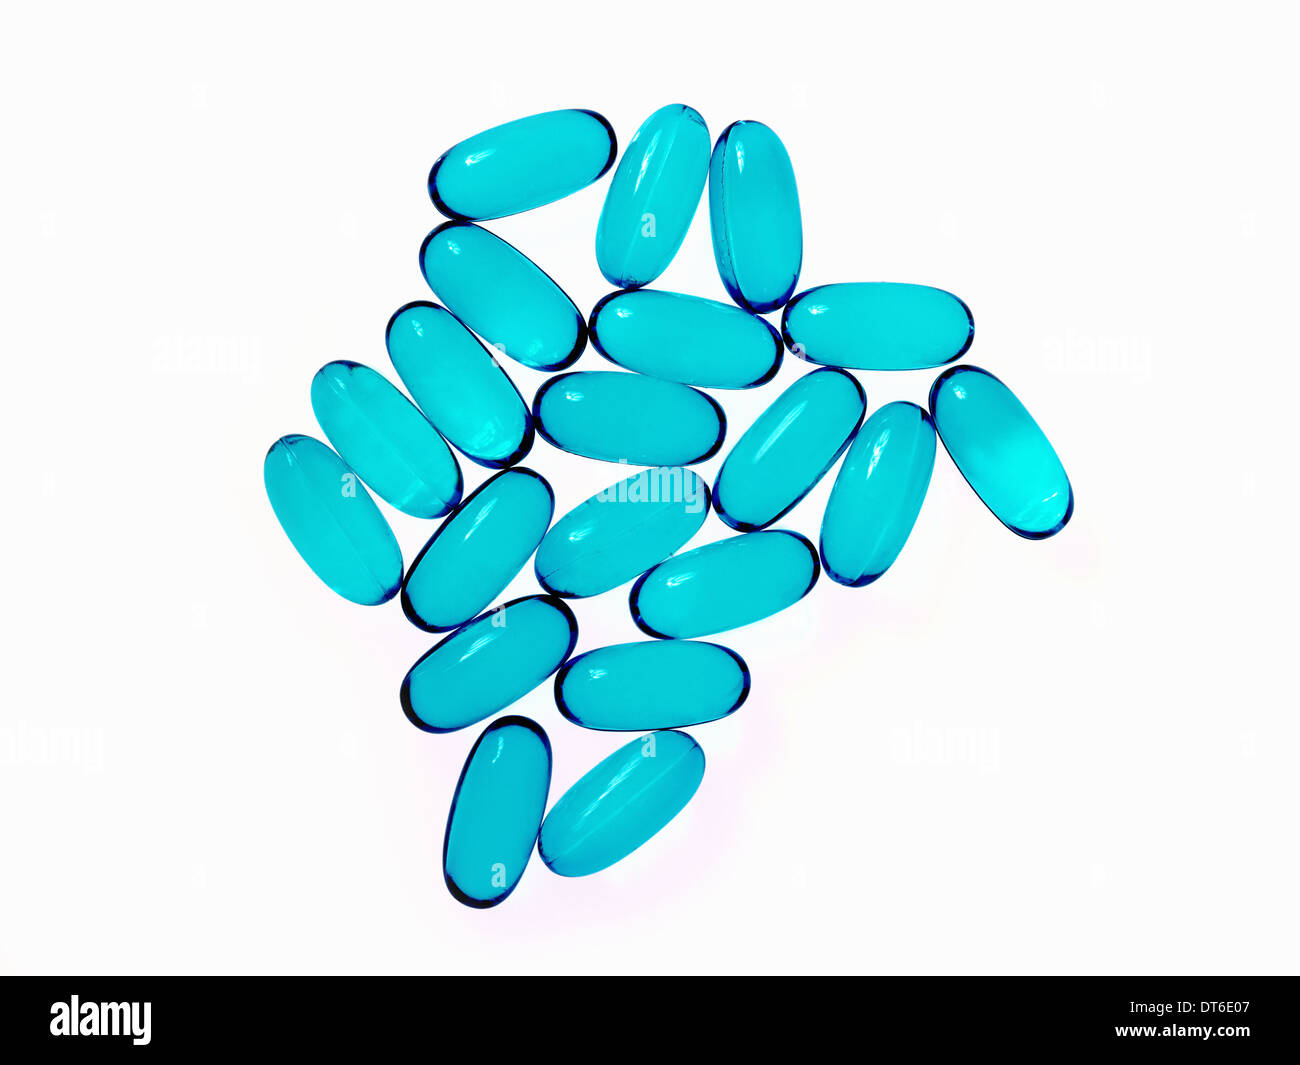 Blue oblong gel pill capsules. Arranged in a pattern. Stock Photo